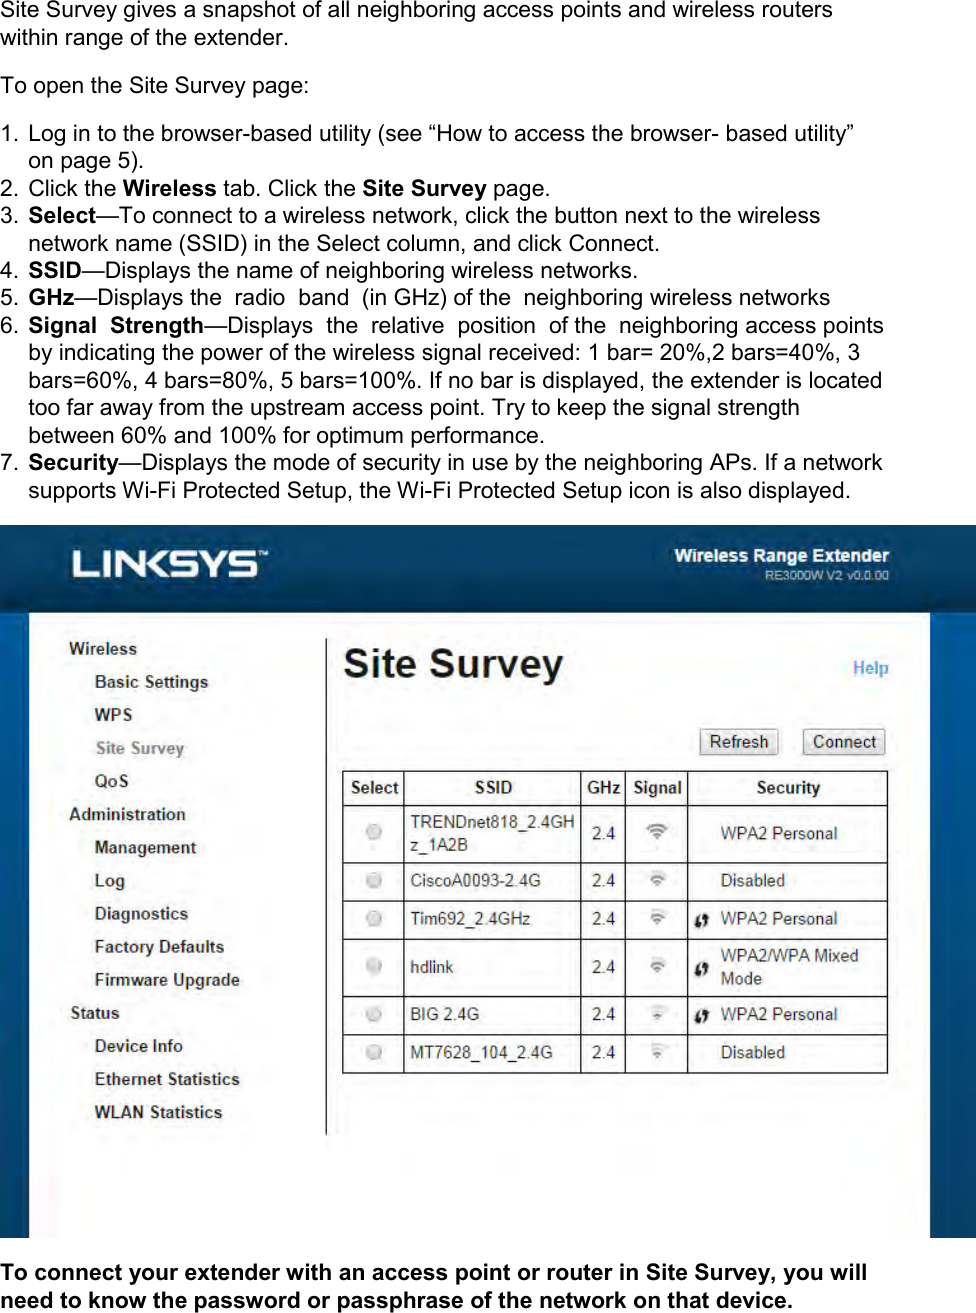 Site Survey gives a snapshot of all neighboring access points and wireless routers within range of the extender. To open the Site Survey page: 1.  Log in to the browser-based utility (see “How to access the browser- based utility” on page 5). 2.  Click the Wireless tab. Click the Site Survey page. 3. Select—To connect to a wireless network, click the button next to the wireless network name (SSID) in the Select column, and click Connect. 4. SSID—Displays the name of neighboring wireless networks. 5. GHz—Displays the  radio  band  (in GHz) of the  neighboring wireless networks 6. Signal  Strength—Displays  the  relative  position  of the  neighboring access points  by indicating the power of the wireless signal received: 1 bar= 20%,2 bars=40%, 3 bars=60%, 4 bars=80%, 5 bars=100%. If no bar is displayed, the extender is located too far away from the upstream access point. Try to keep the signal strength between 60% and 100% for optimum performance. 7. Security—Displays the mode of security in use by the neighboring APs. If a network supports Wi-Fi Protected Setup, the Wi-Fi Protected Setup icon is also displayed.  To connect your extender with an access point or router in Site Survey, you will need to know the password or passphrase of the network on that device. 